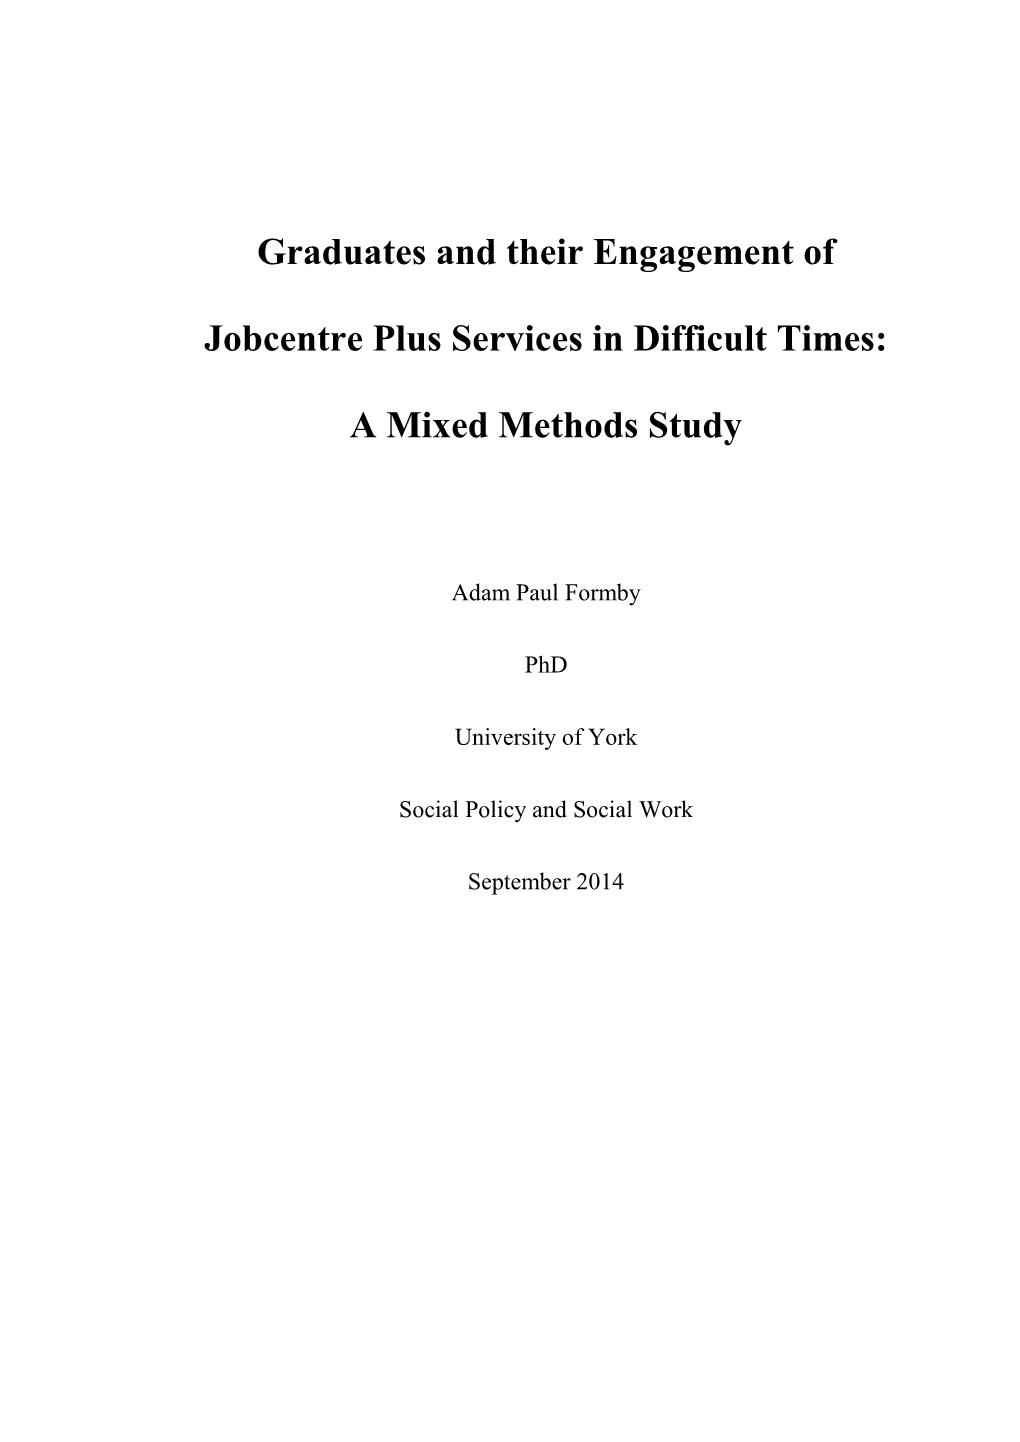 Graduates and Their Engagement of Jobcentre Plus Services in Difficult